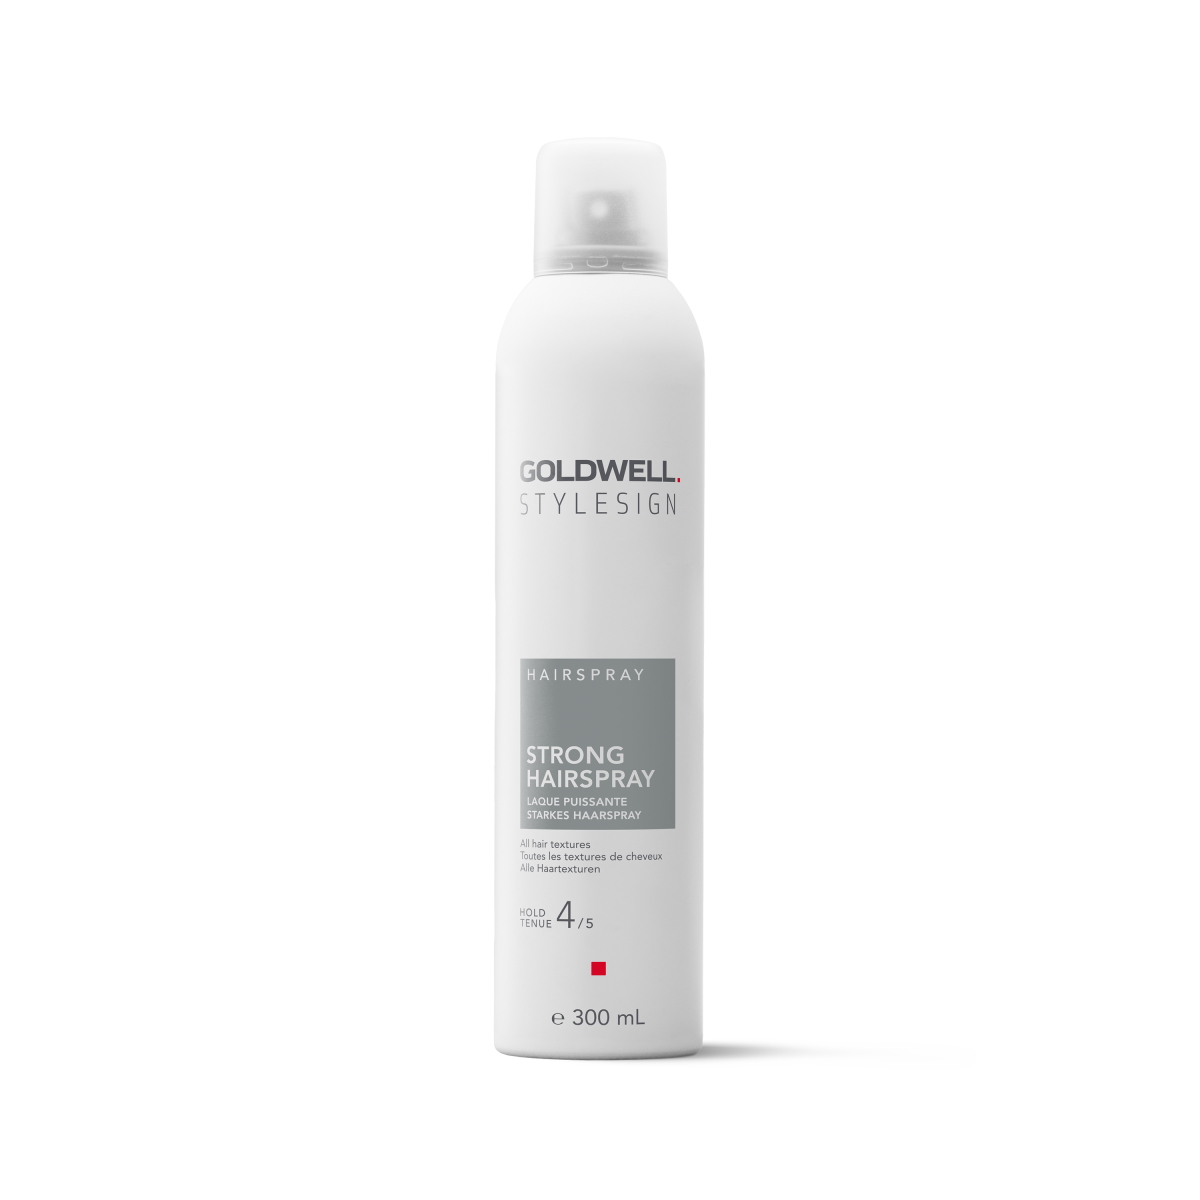 Goldwell Style Sign Hairspray Strong Hairspray 500ml